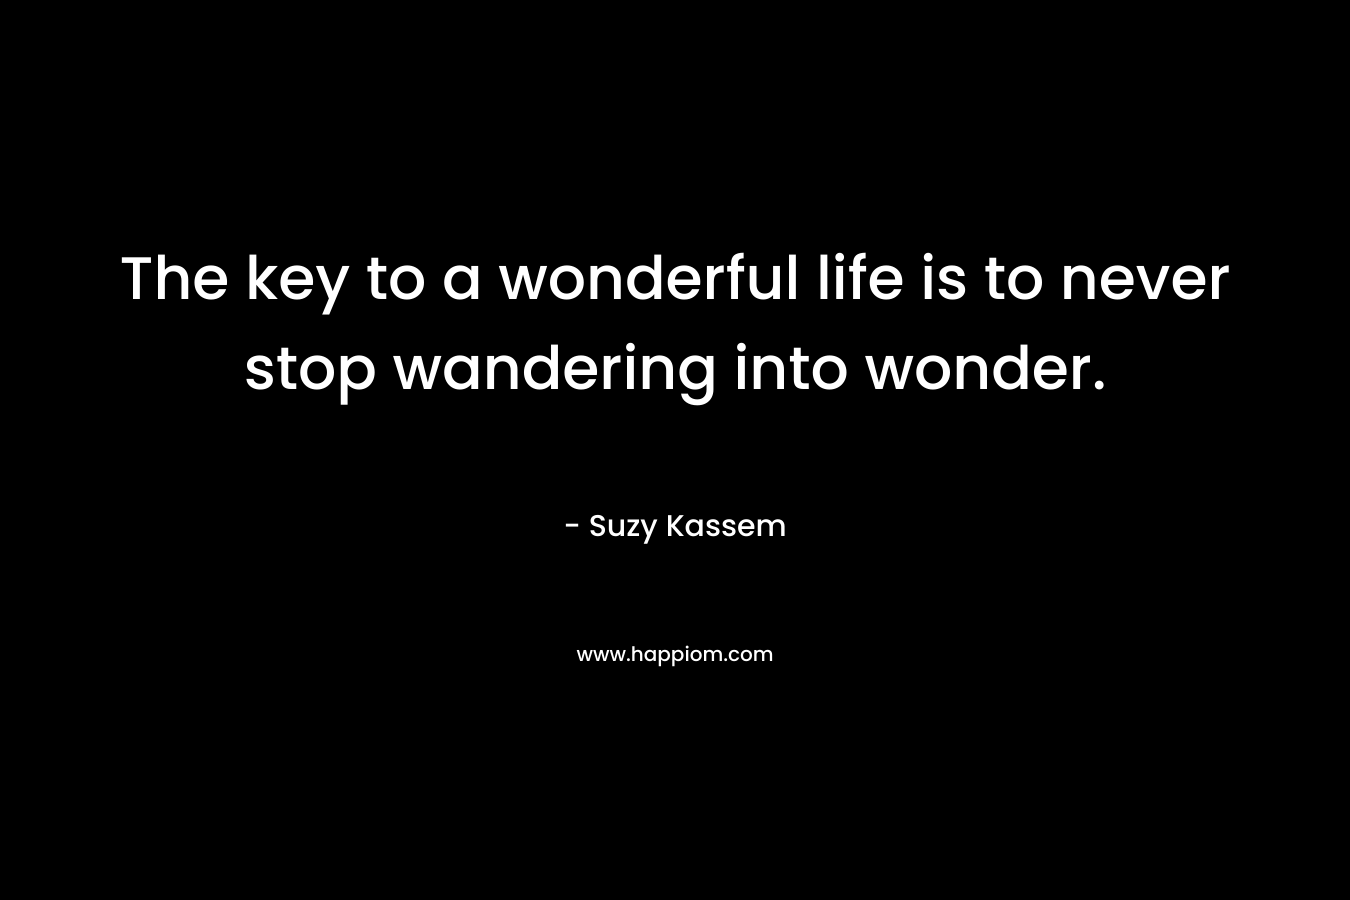 The key to a wonderful life is to never stop wandering into wonder.